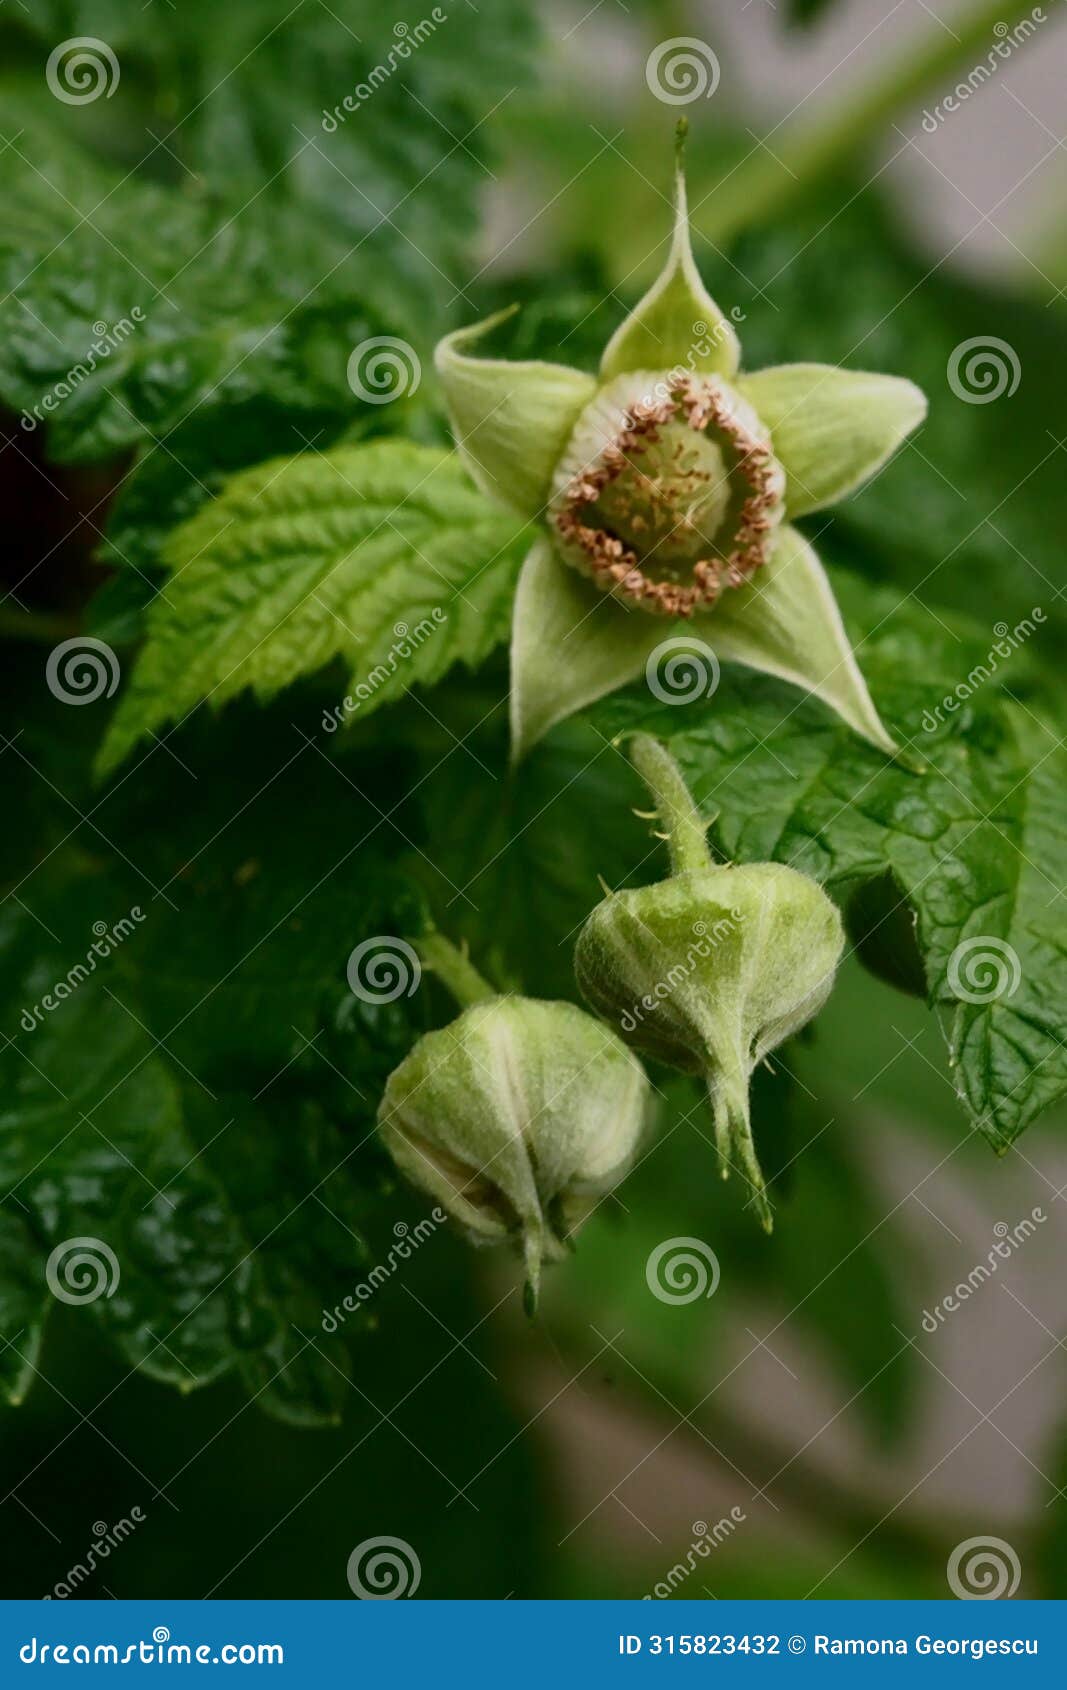 macro photo of the fruit in formation (sepals, stamens, fruit, floral receptacle) rubus idaeus